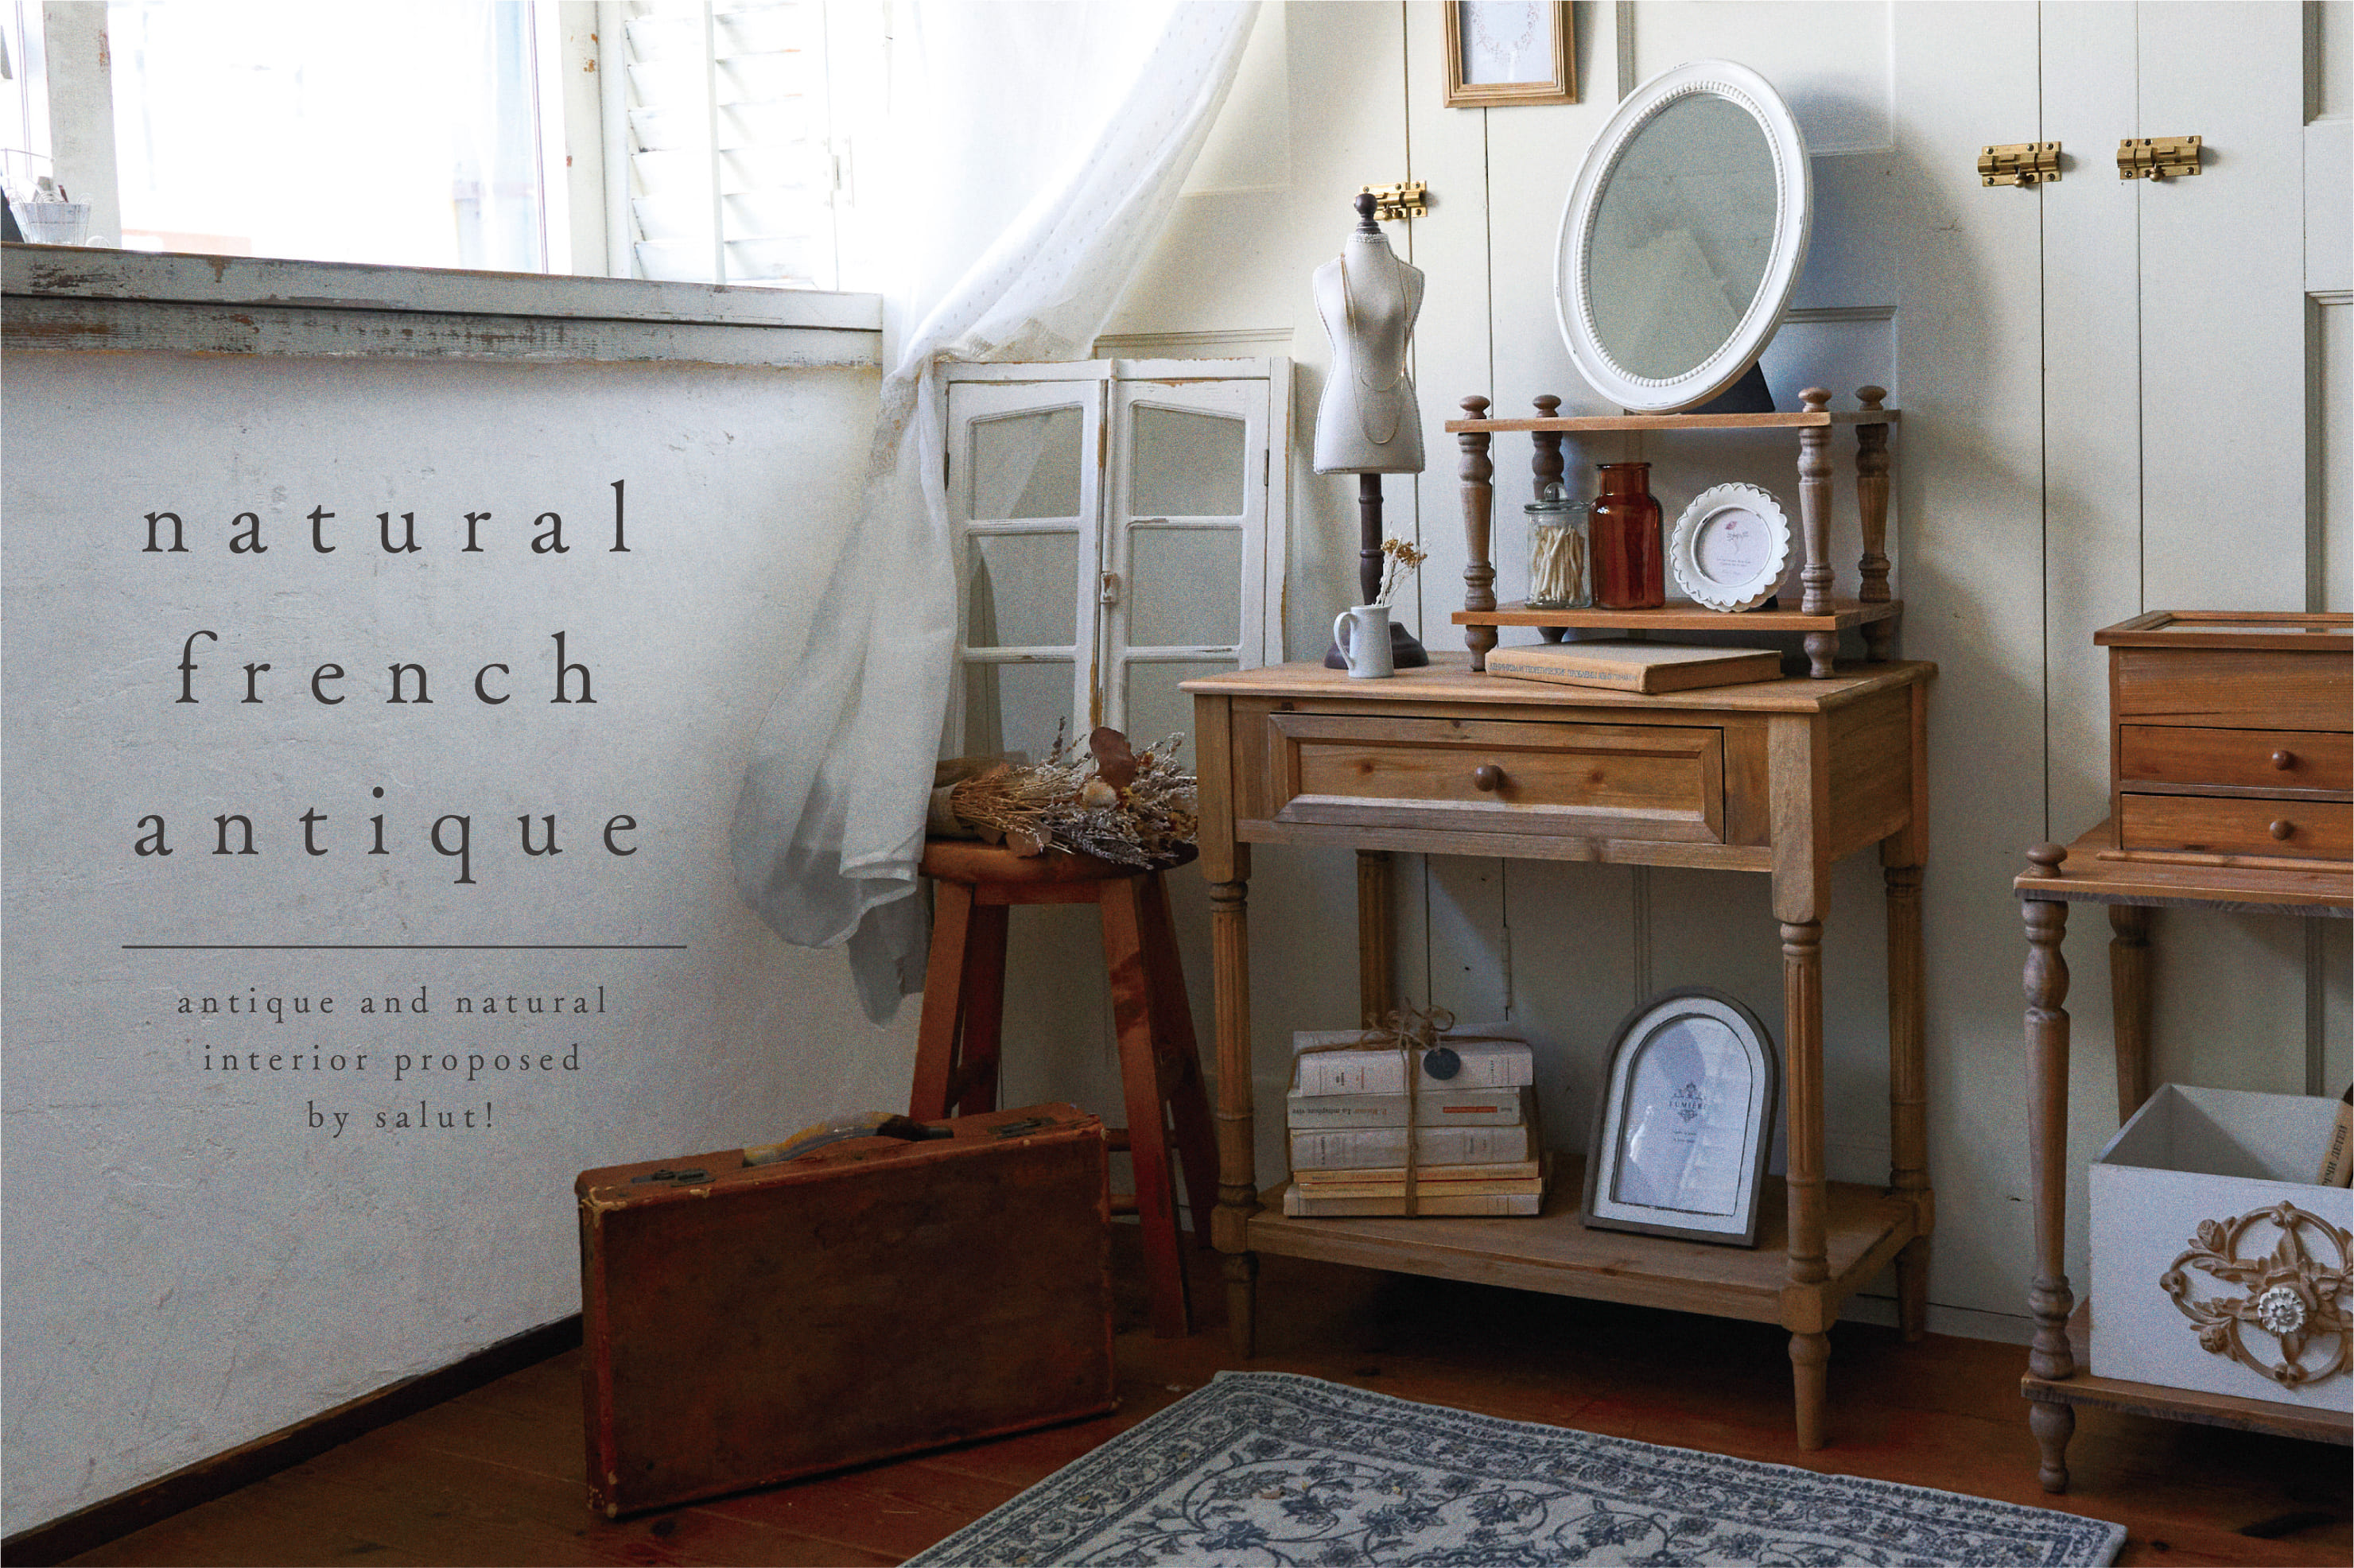 salut! ・natural french antique・4/4より販売開始